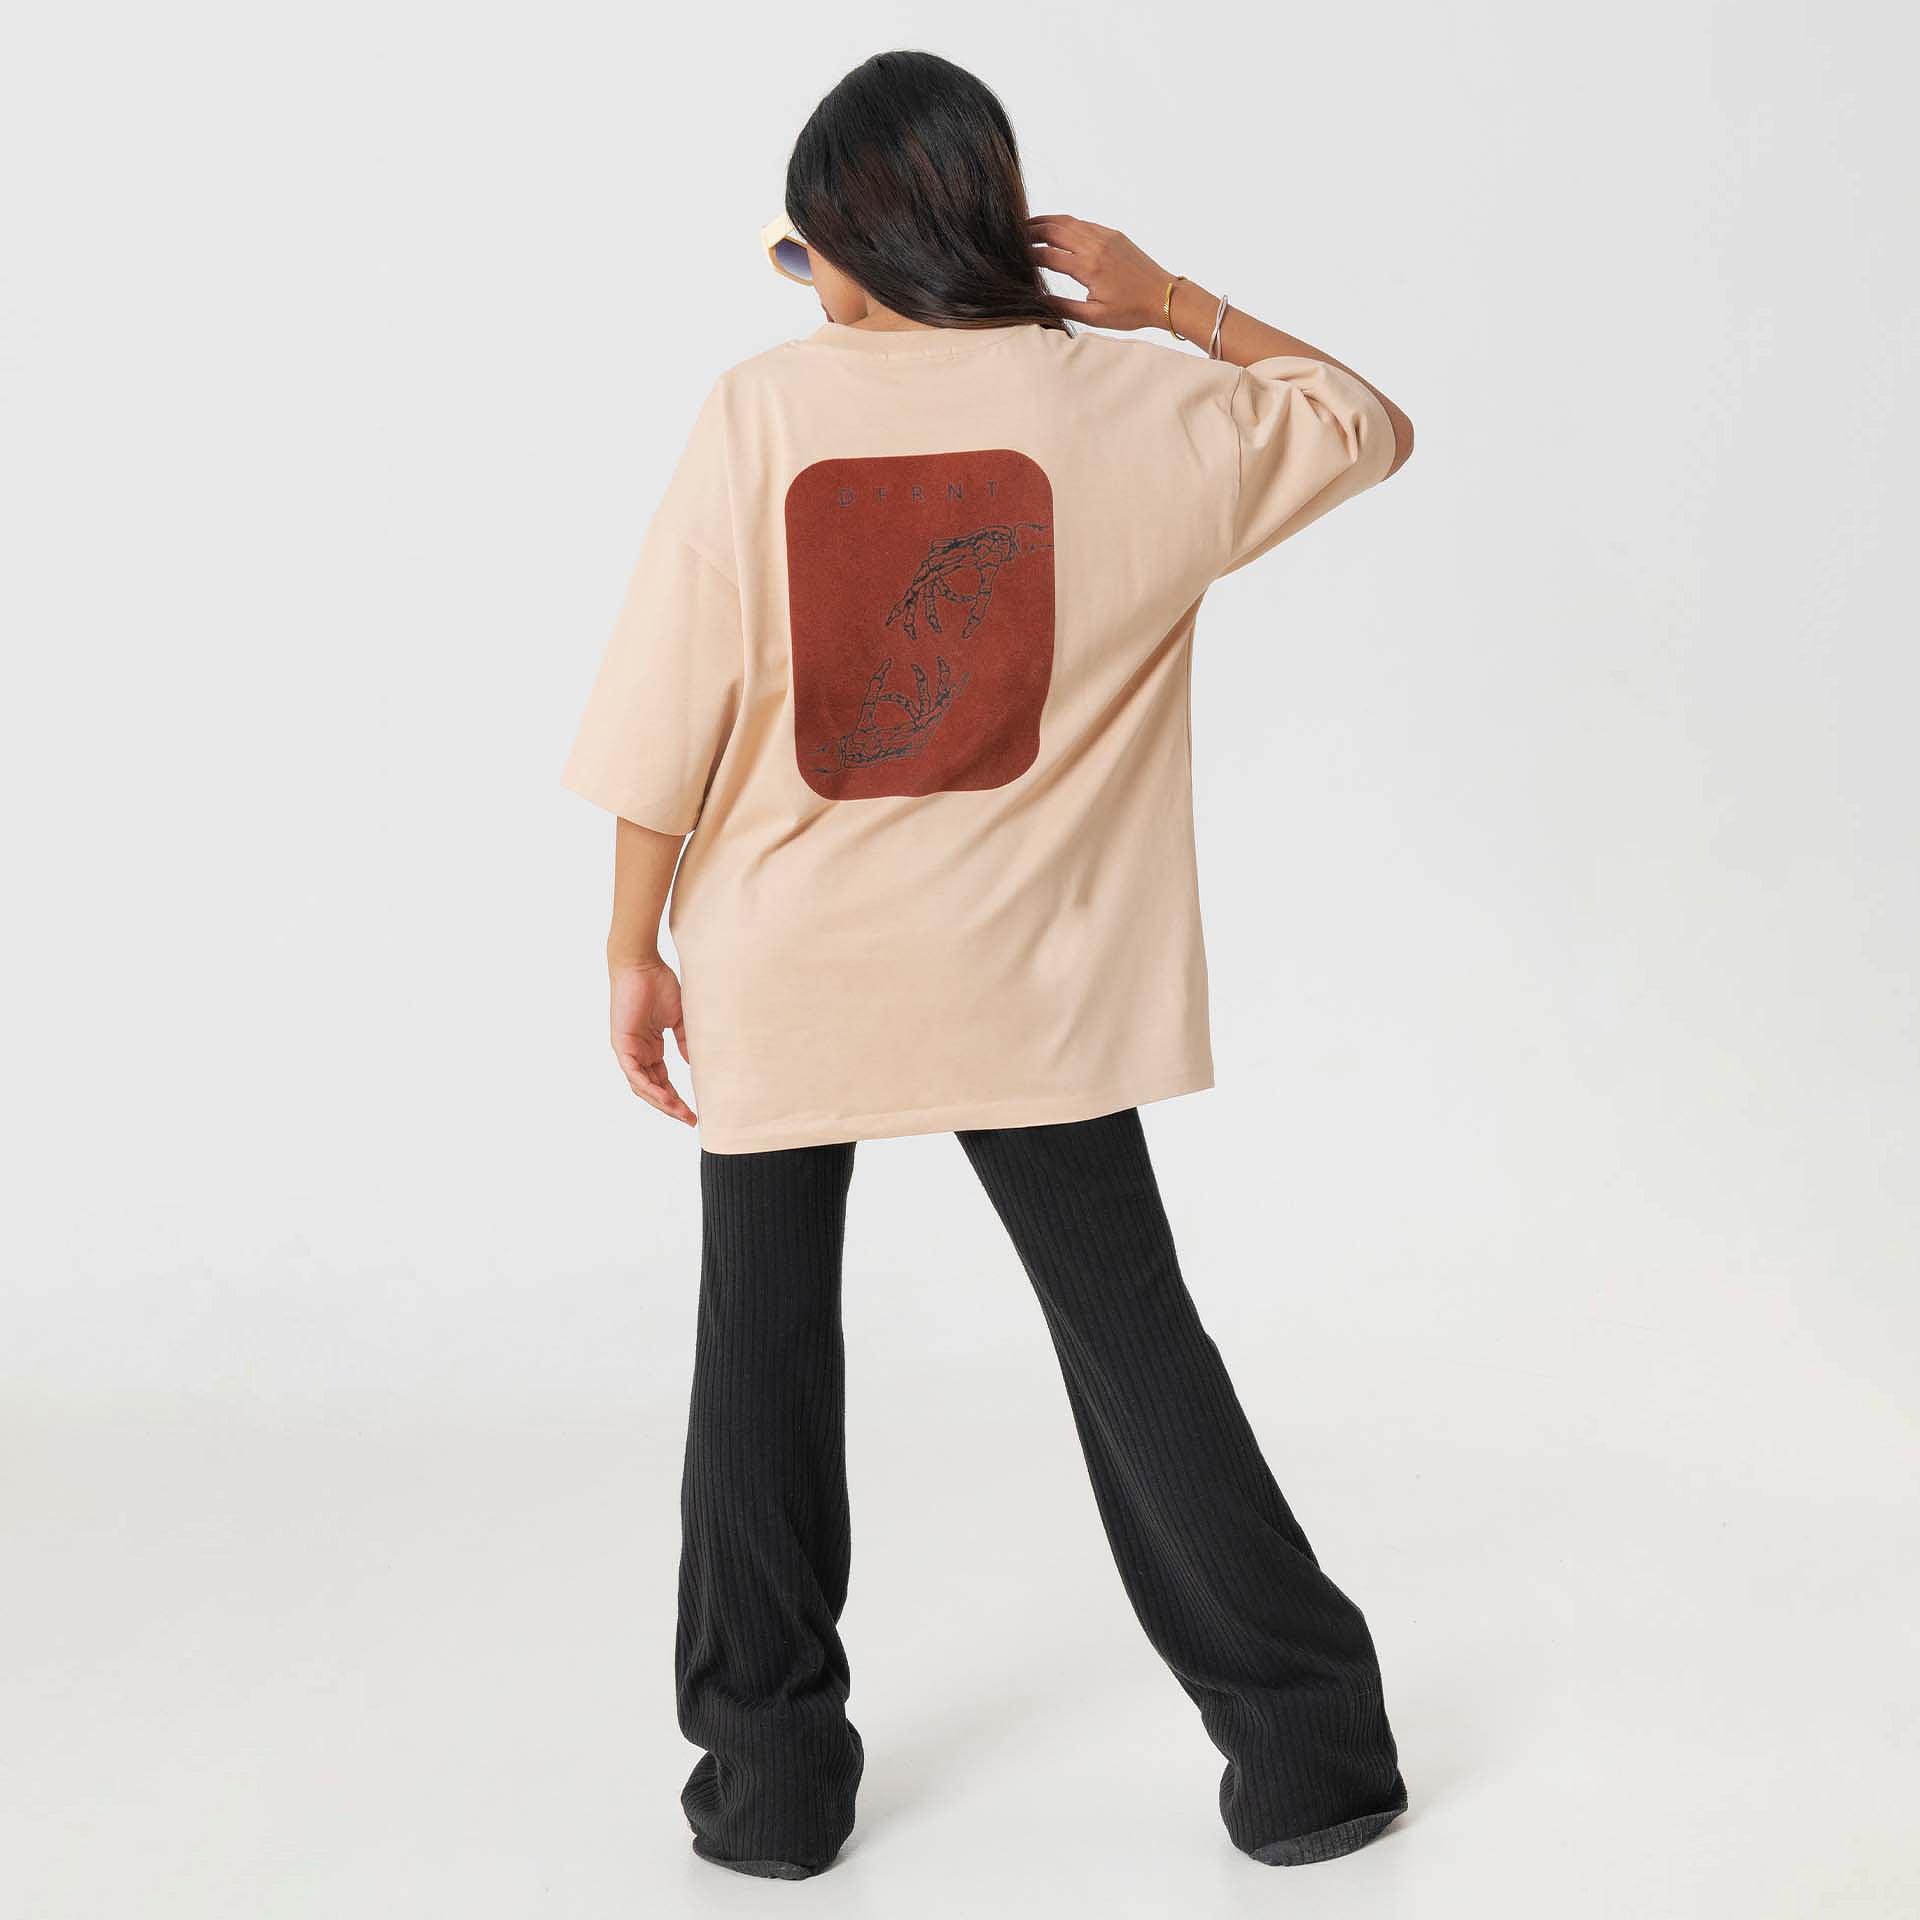 Light Brown T-Shirt With A Print On The Back From DFRNT